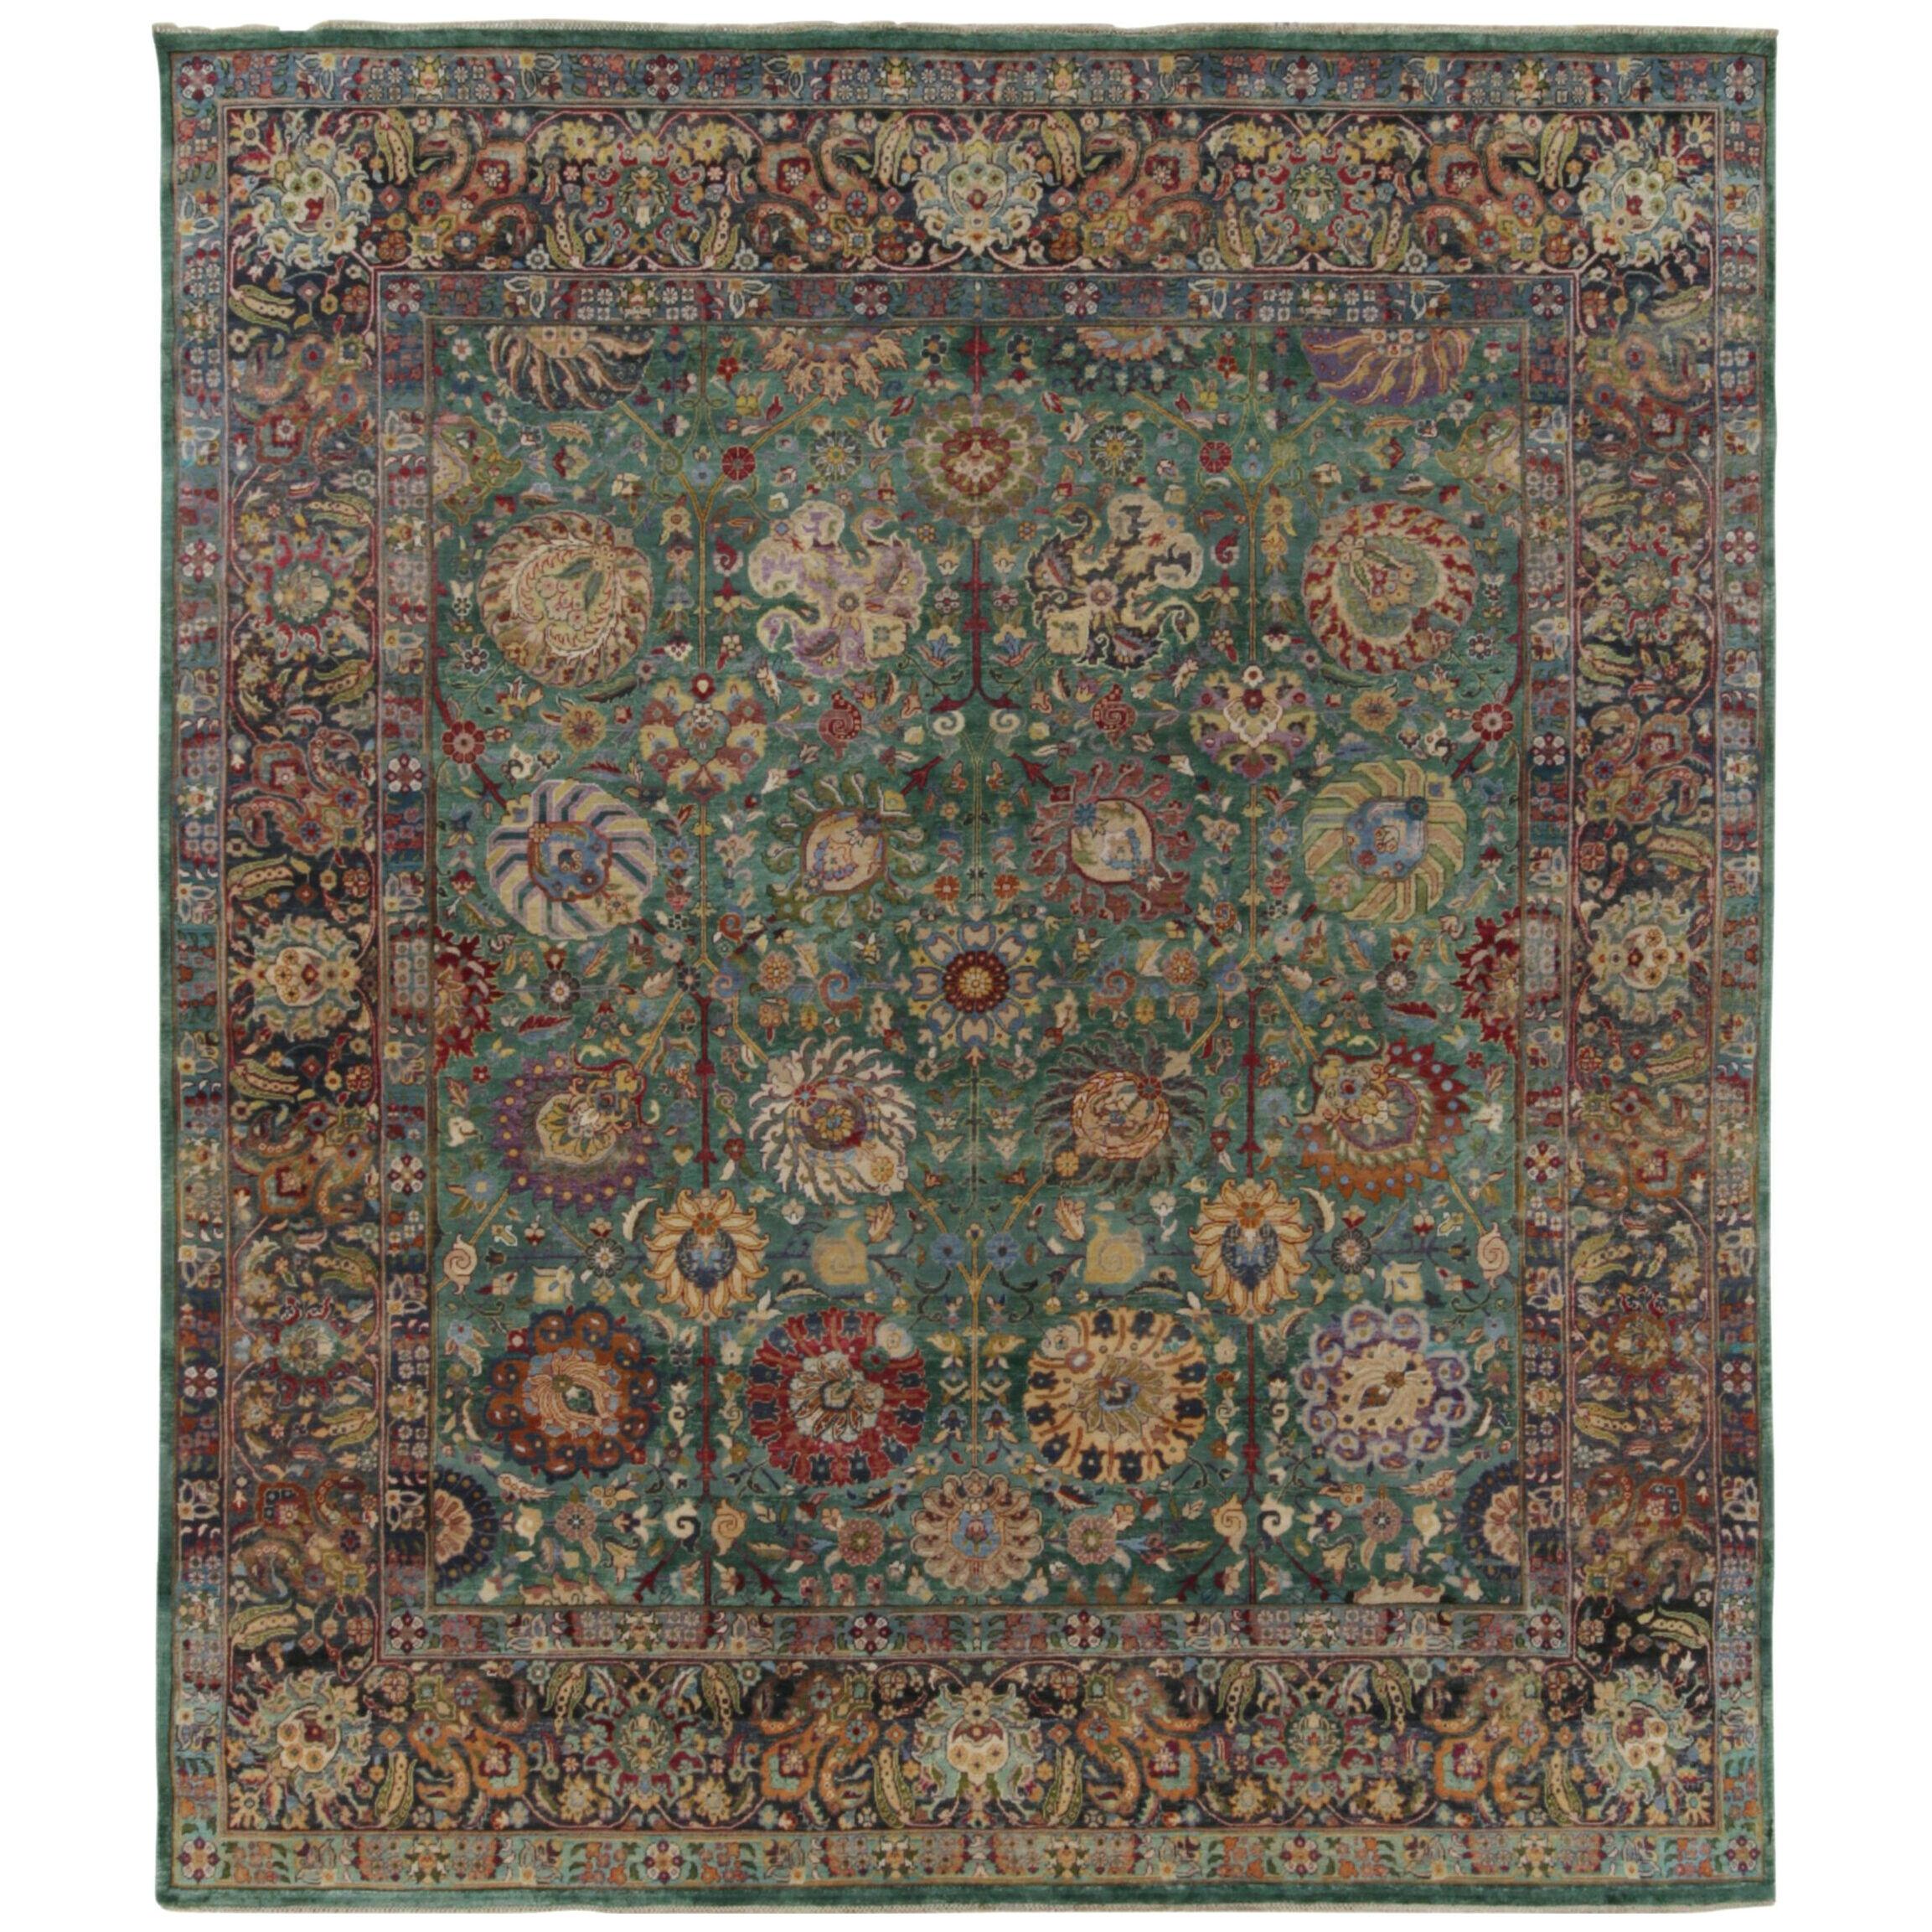 Rug & Kilim’s Classic Garden Style Rug in Green, Blue and Polychromatic Florals